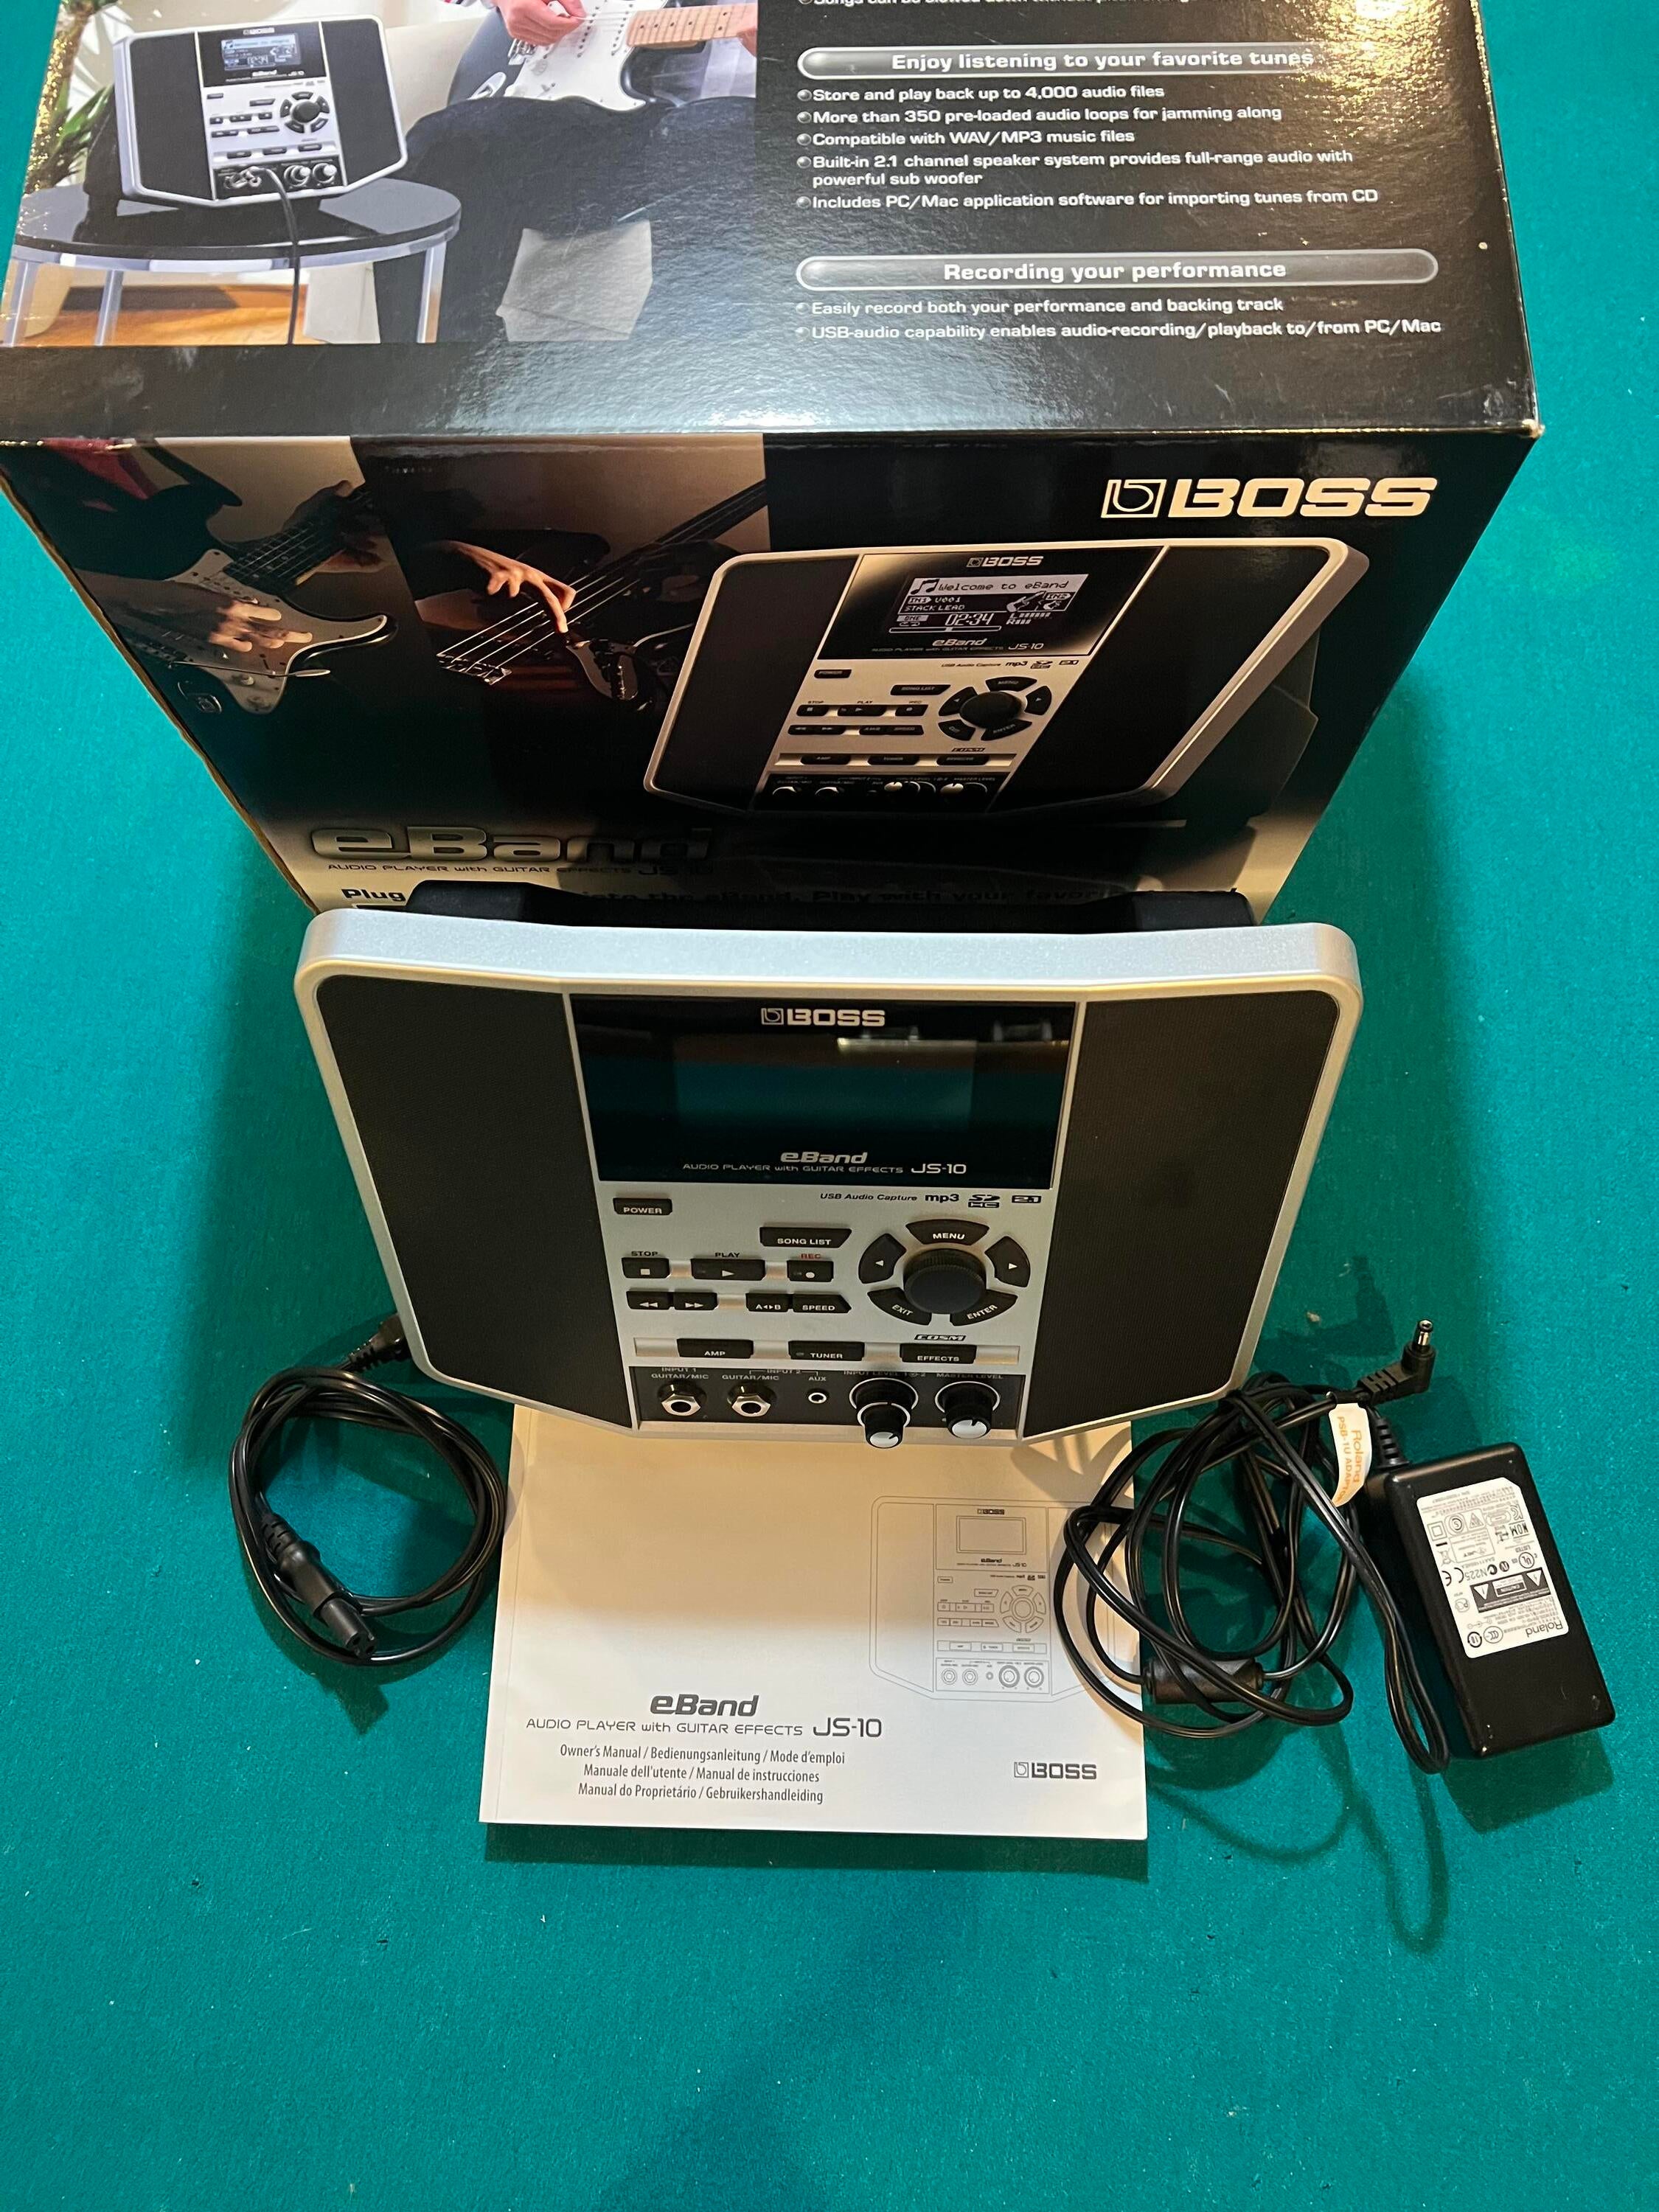 Used Boss eBand JS-10 Audio Player and - Sweetwater's Gear Exchange